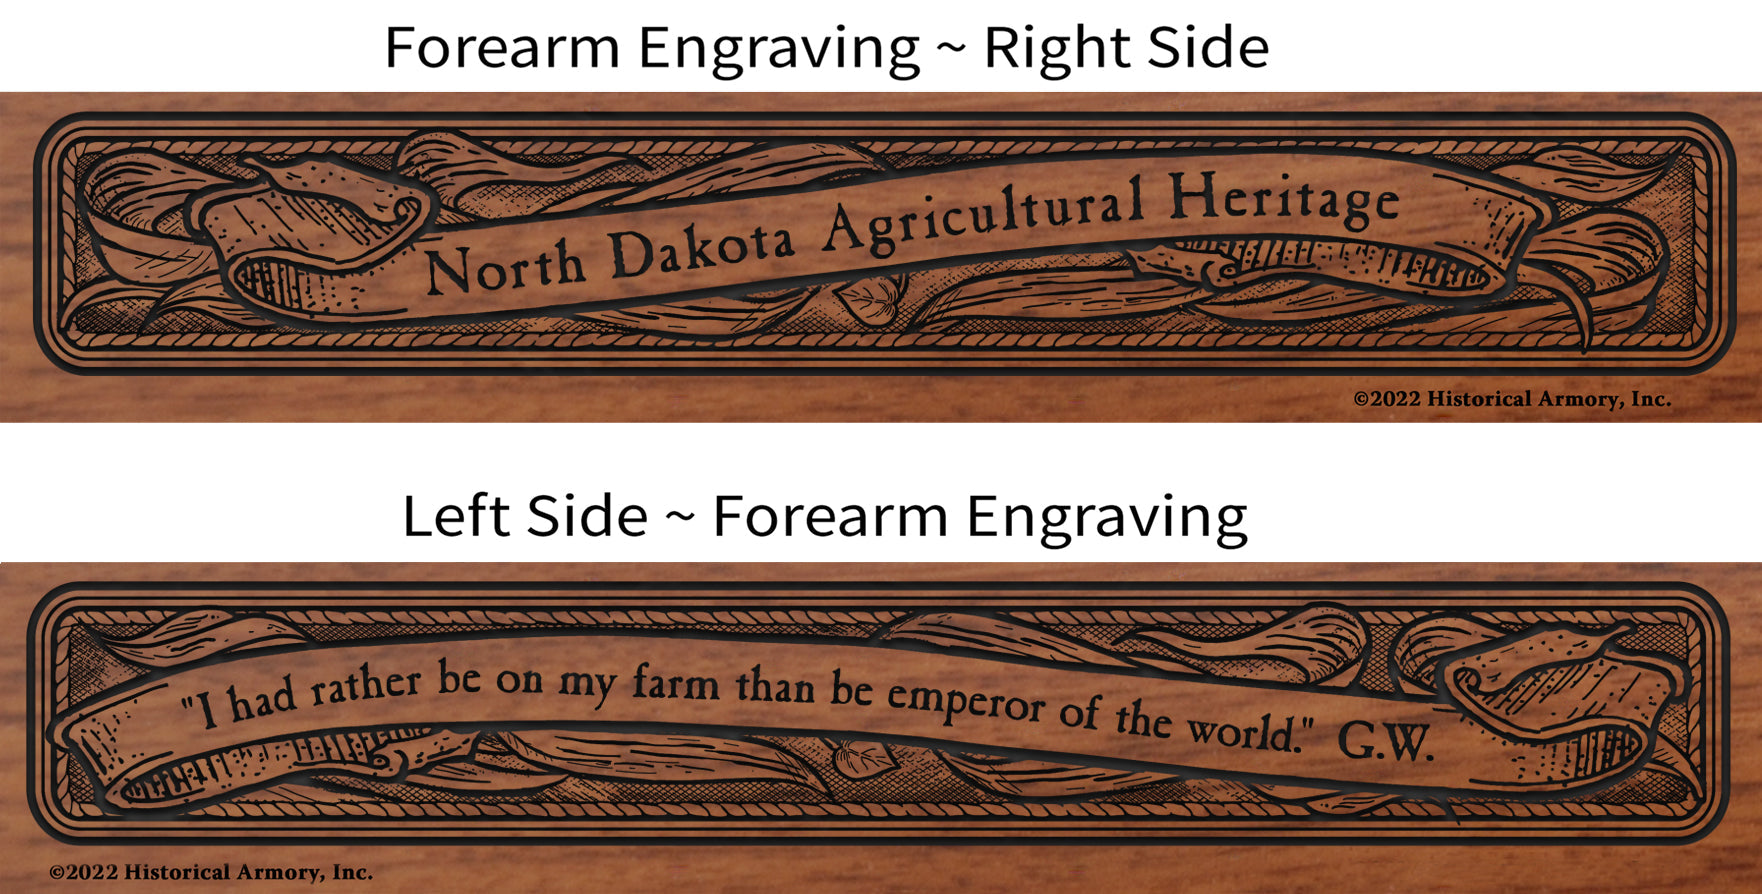 North Dakota Agricultural Heritage Engraved Rifle Forearm